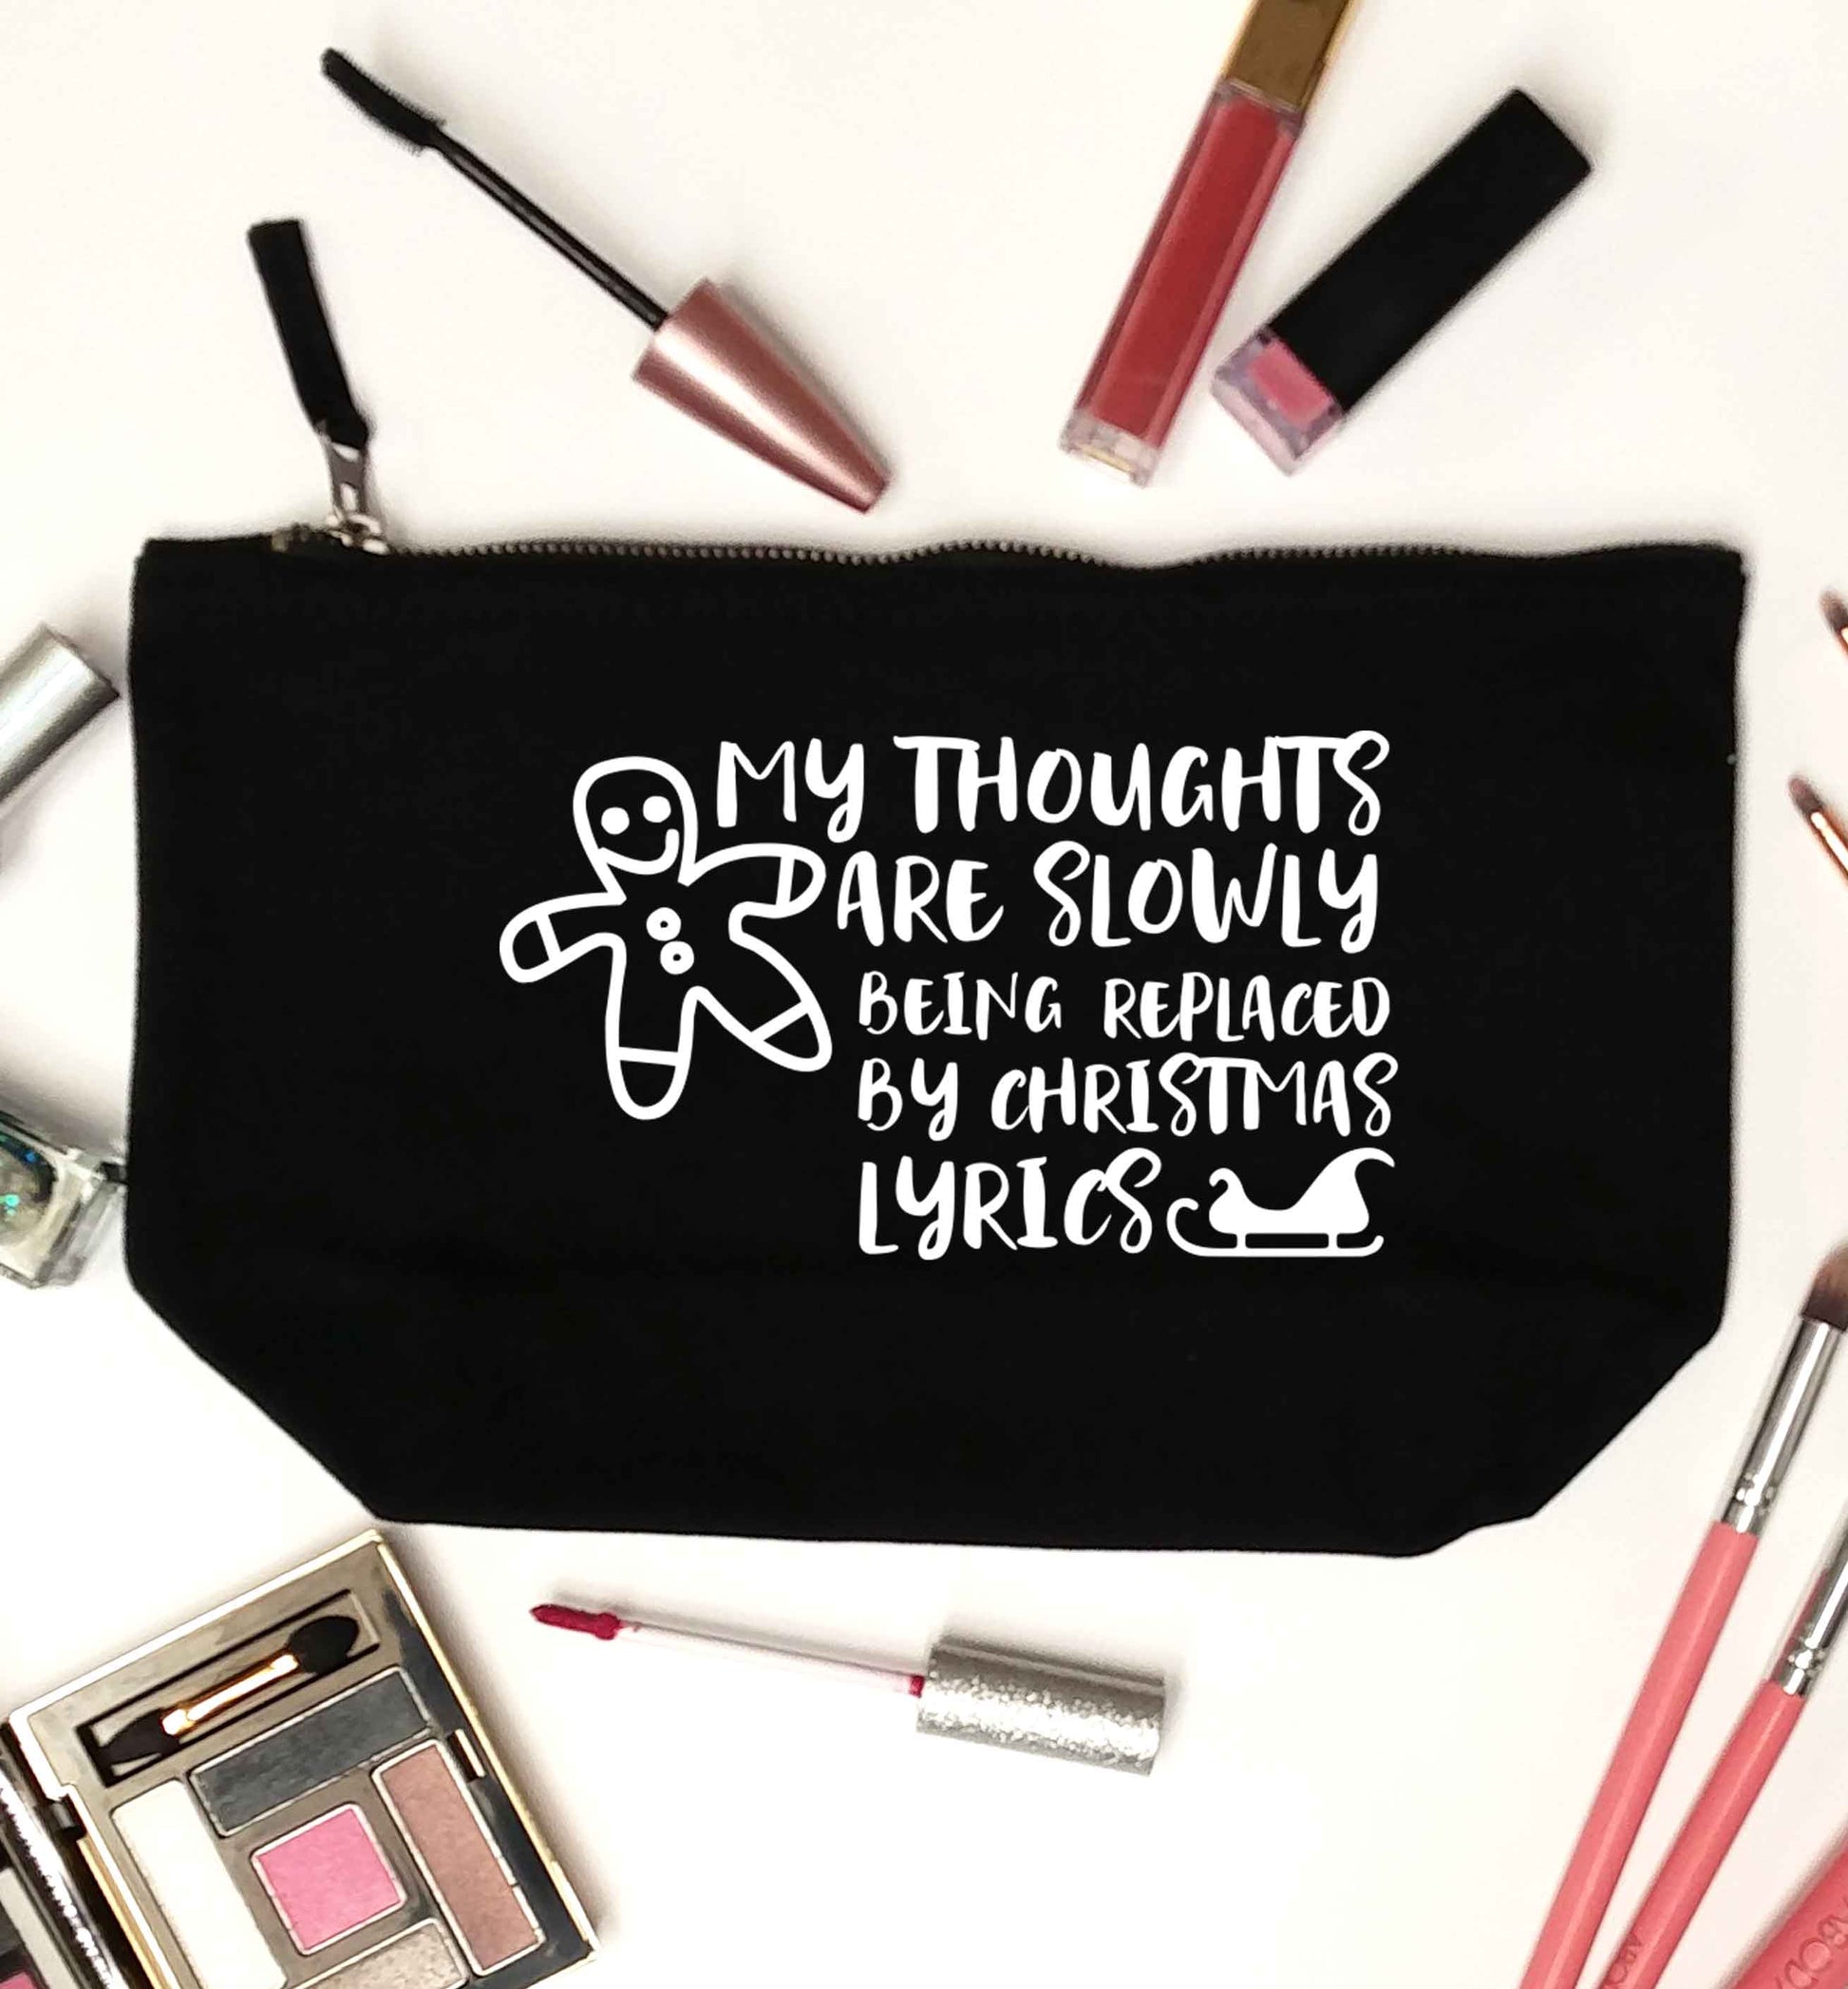 My thoughts are slowly being replaced by Christmas lyrics black makeup bag